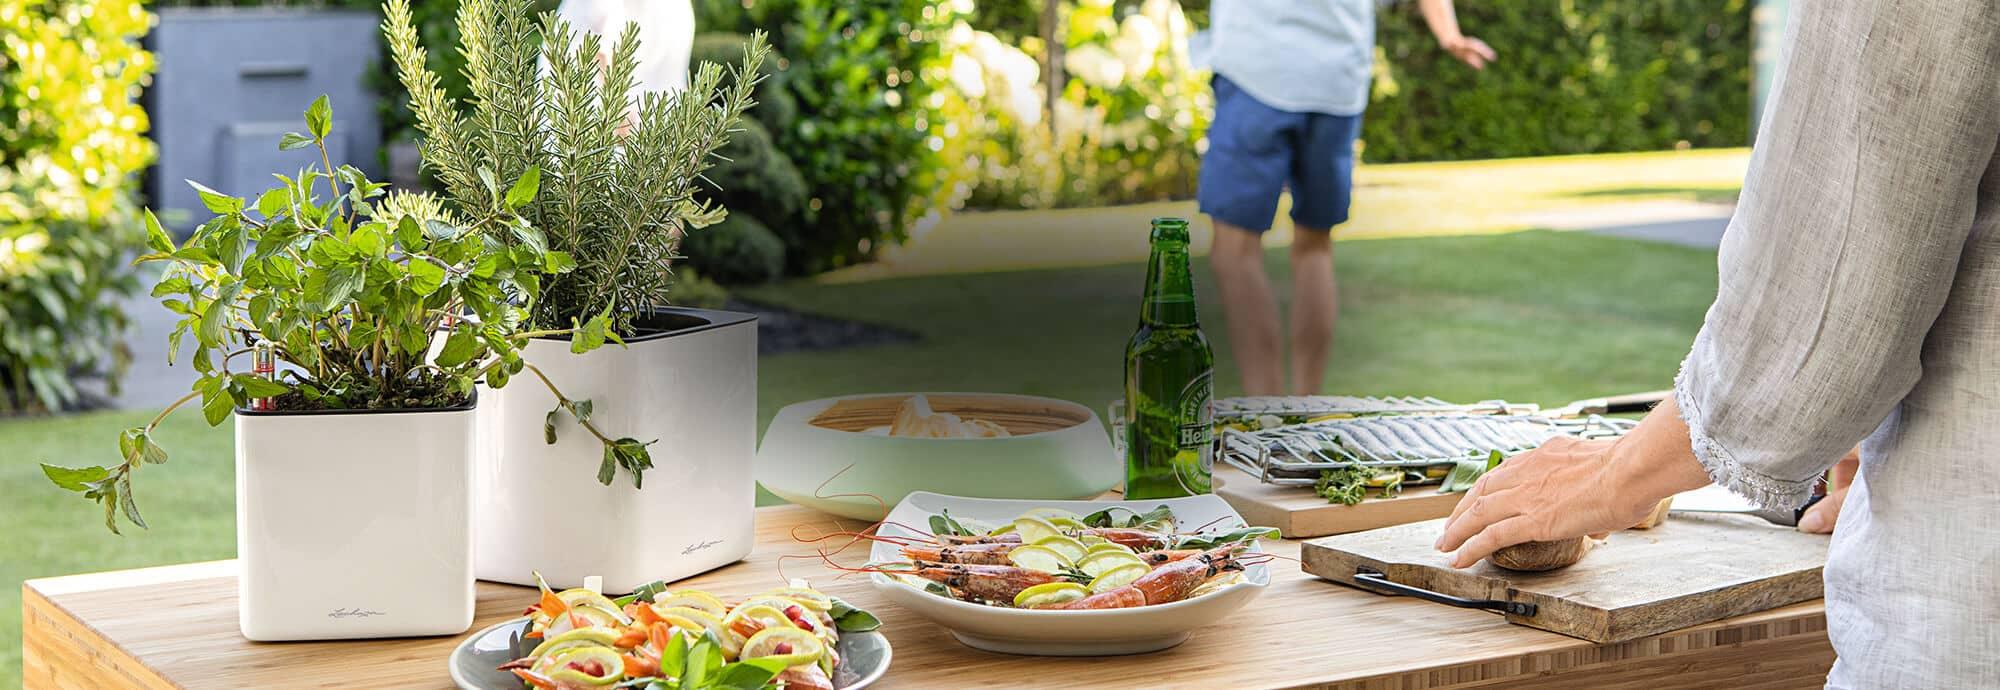 Outdoor kitchen - Enjoy summer in the outdoors